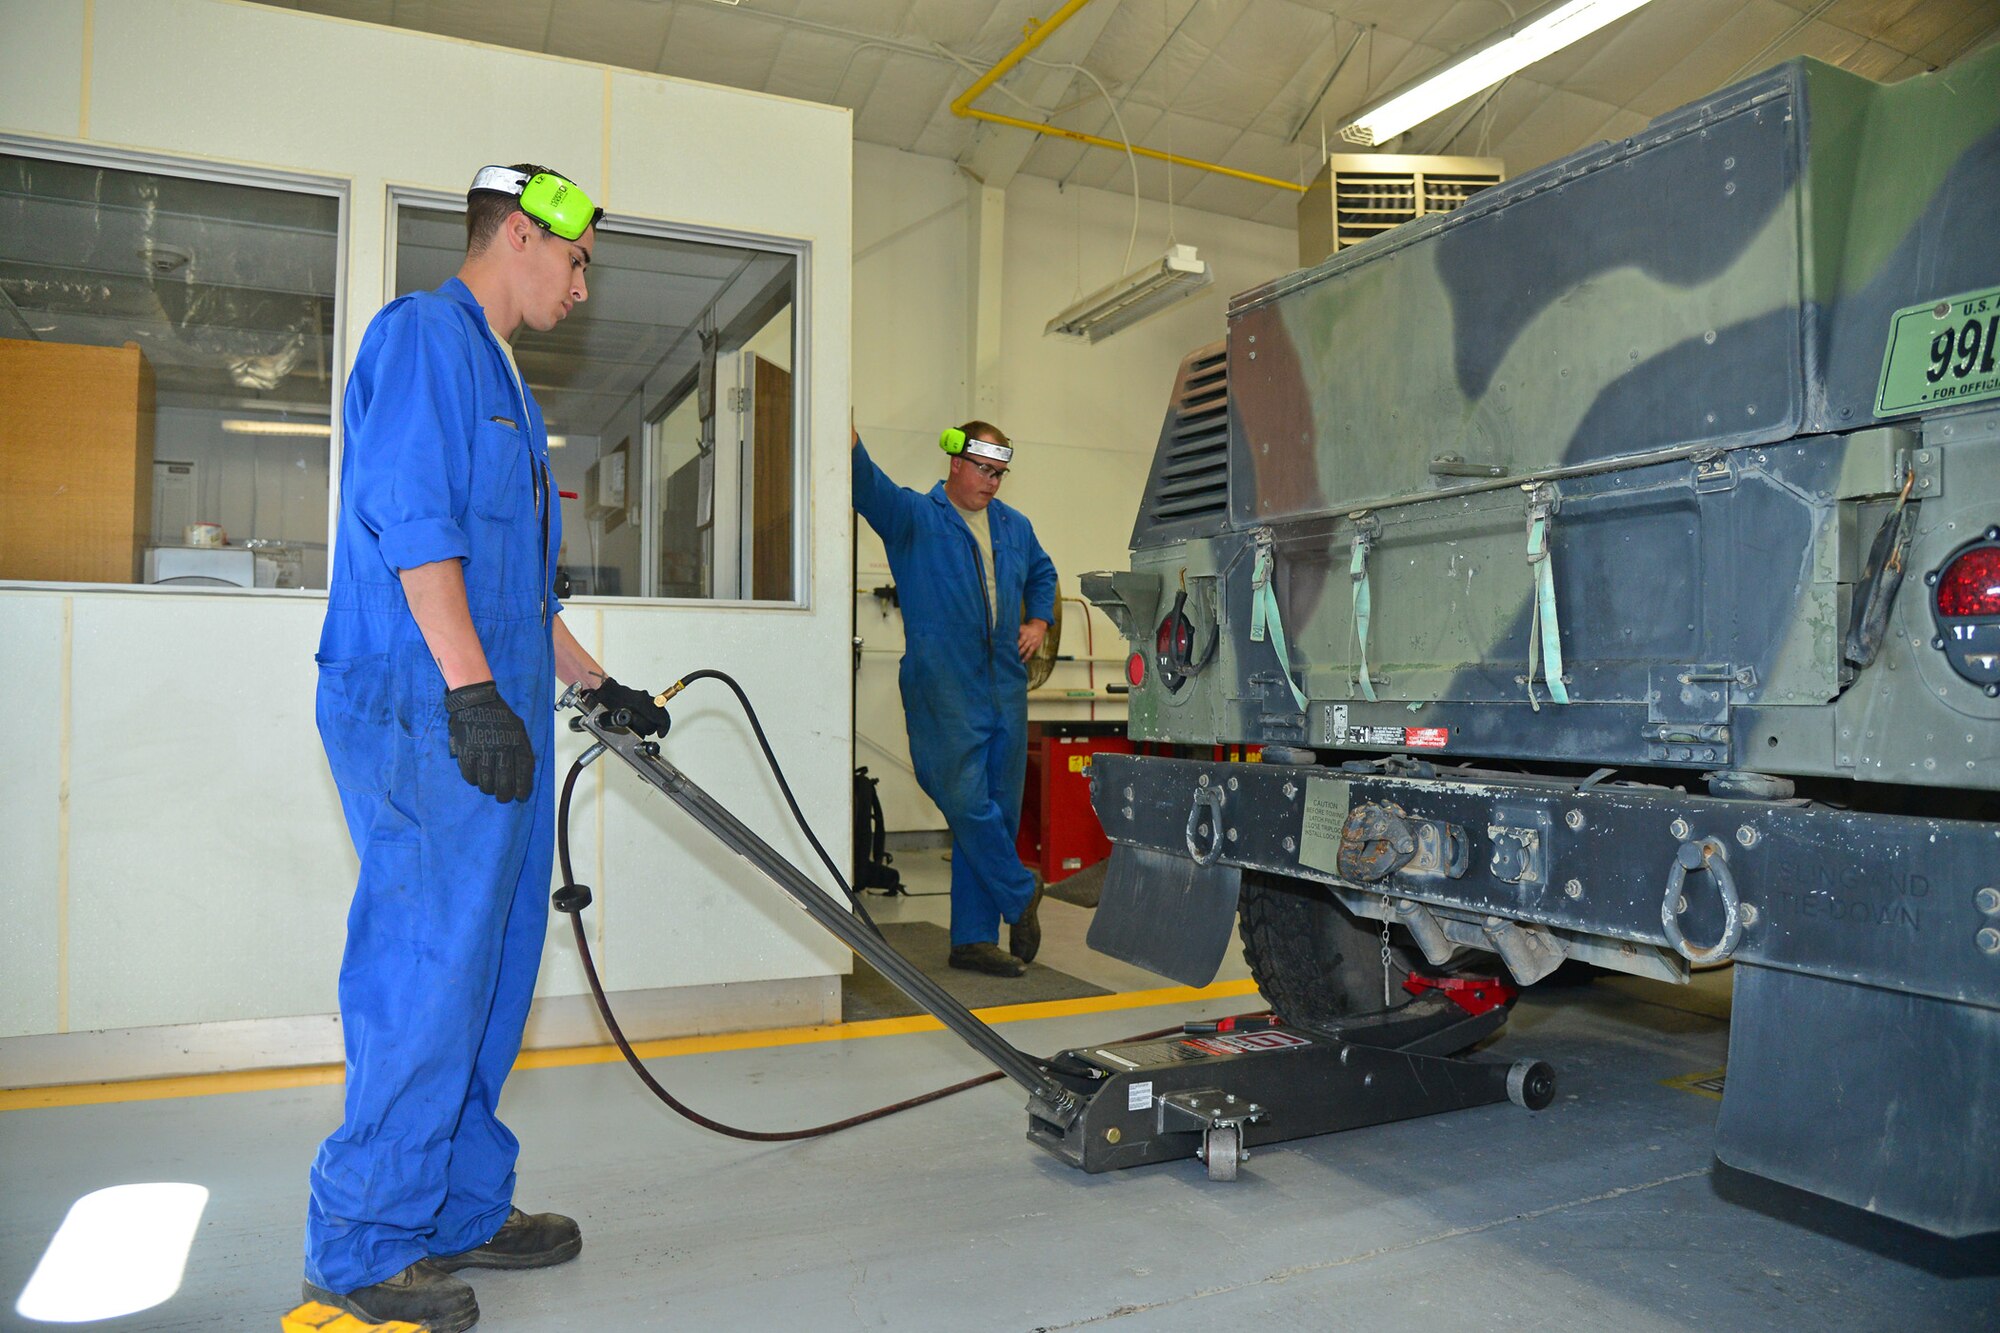 Senior Airmen Brennan Popp, left, and Hunter Dombek, 341st Logistics Readiness Squadron mission generating vehicular equipment maintenance technicians, raise a Humvee to replace its tires July 7, 2016, at Malmstrom Air Force Base, Mont. The Airmen use a lift to manually raise the vehicle and place a metal stand underneath the axle to add extra support in keeping the vehicle at the correct height and to keep them safe. (U.S. Air Force photo/Airman 1st Class Daniel Brosam)

